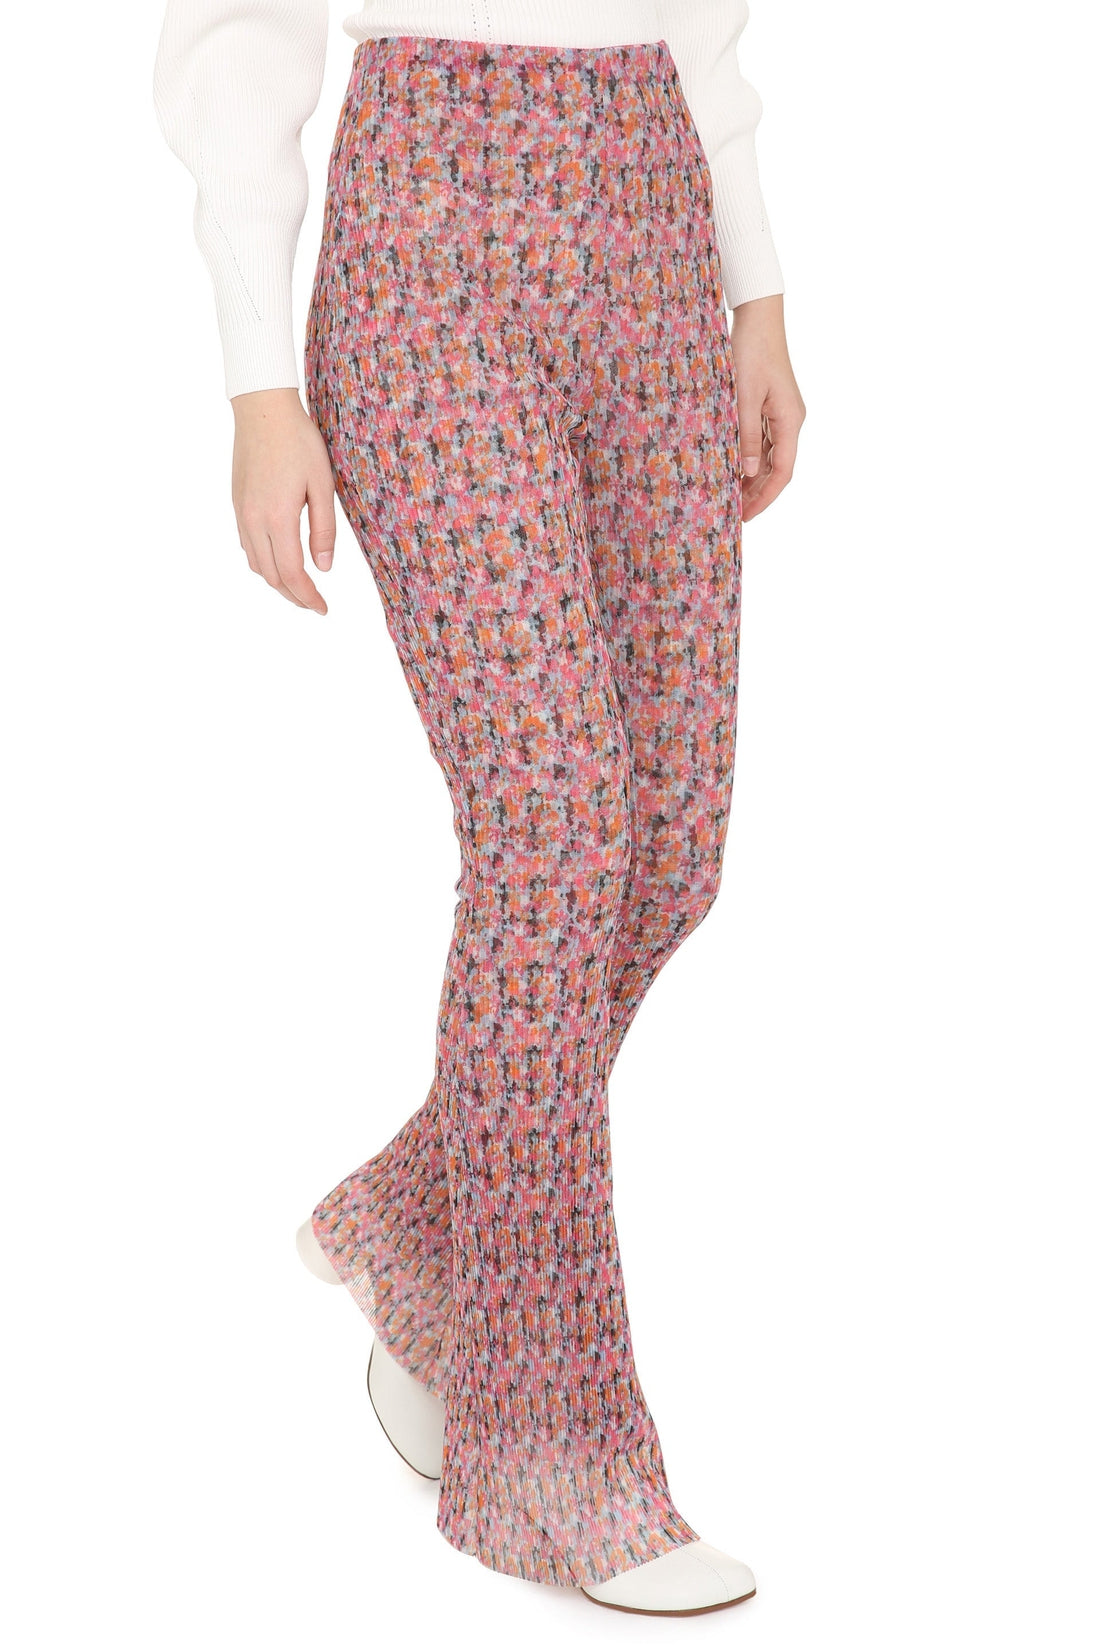 Philosophy di Lorenzo Serafini-OUTLET-SALE-Printed high-rise trousers-ARCHIVIST